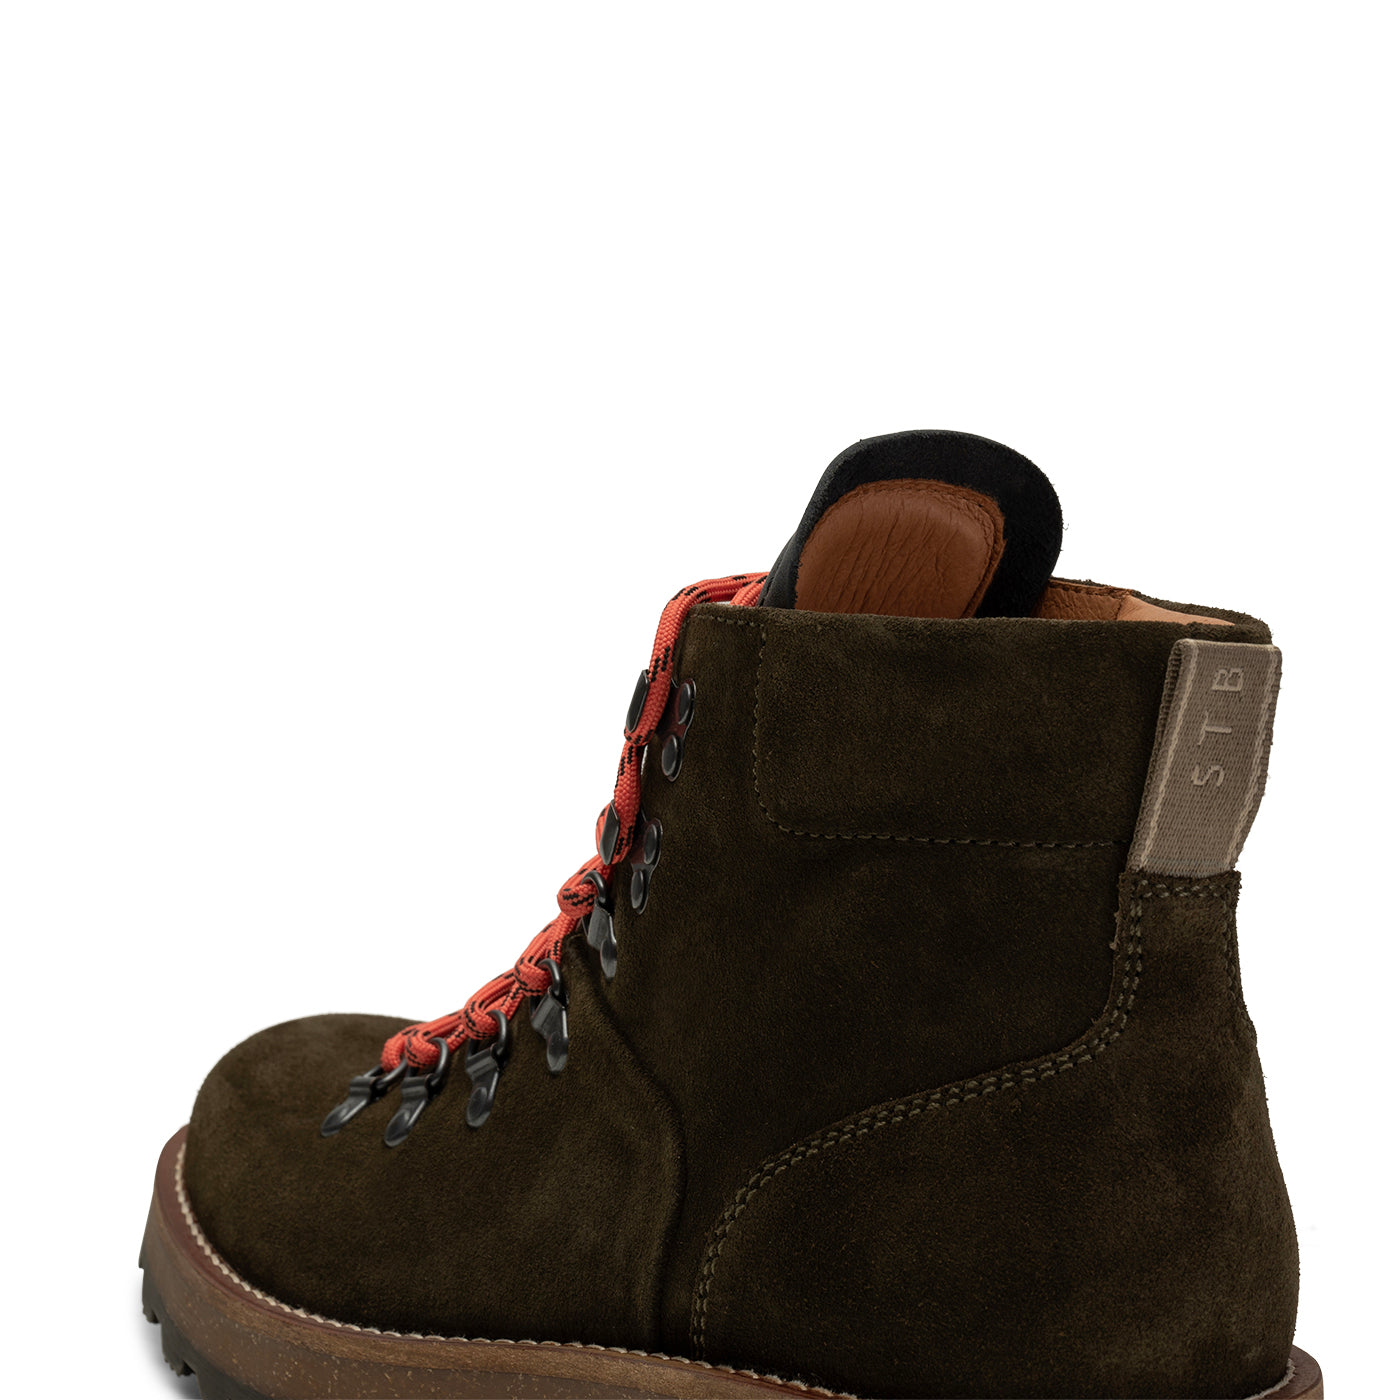 SHOE THE BEAR MENS Rosco Boot Water Repellent Suede Boots 151 KHAKI